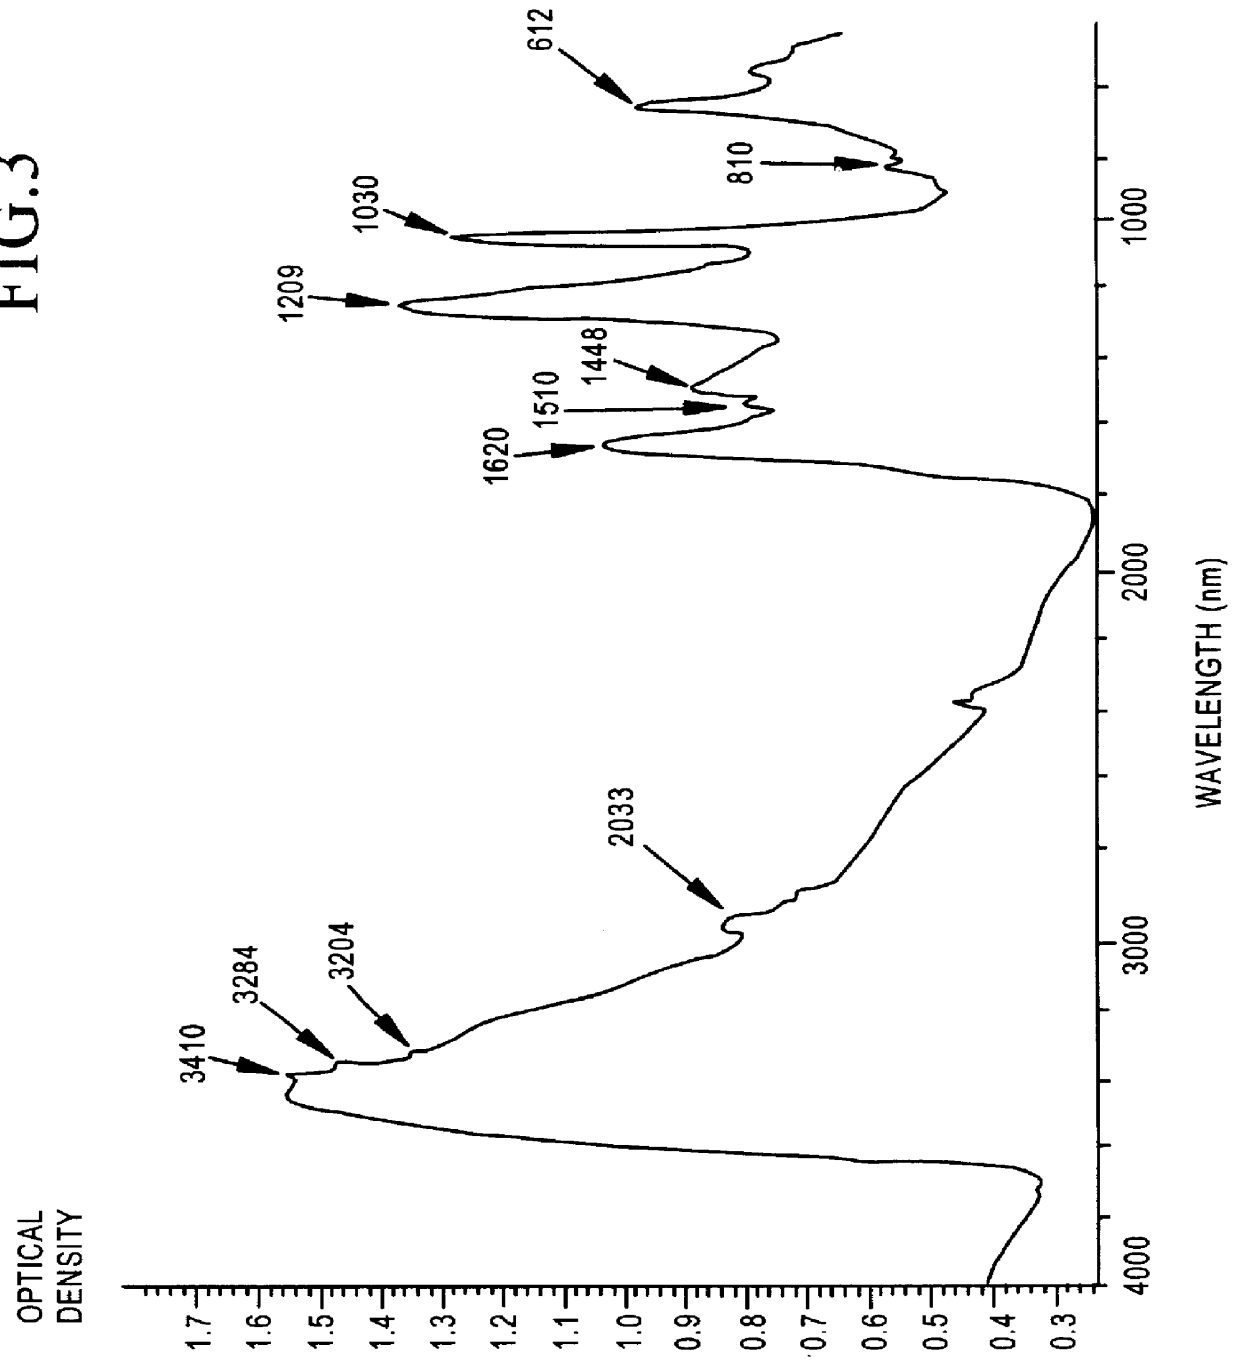 Sodium salt of [poly-(2,5-dihydroxyphenylene)]-4-thiosulphuric acid of linear structure as regulator of cell metabolism and production method thereof